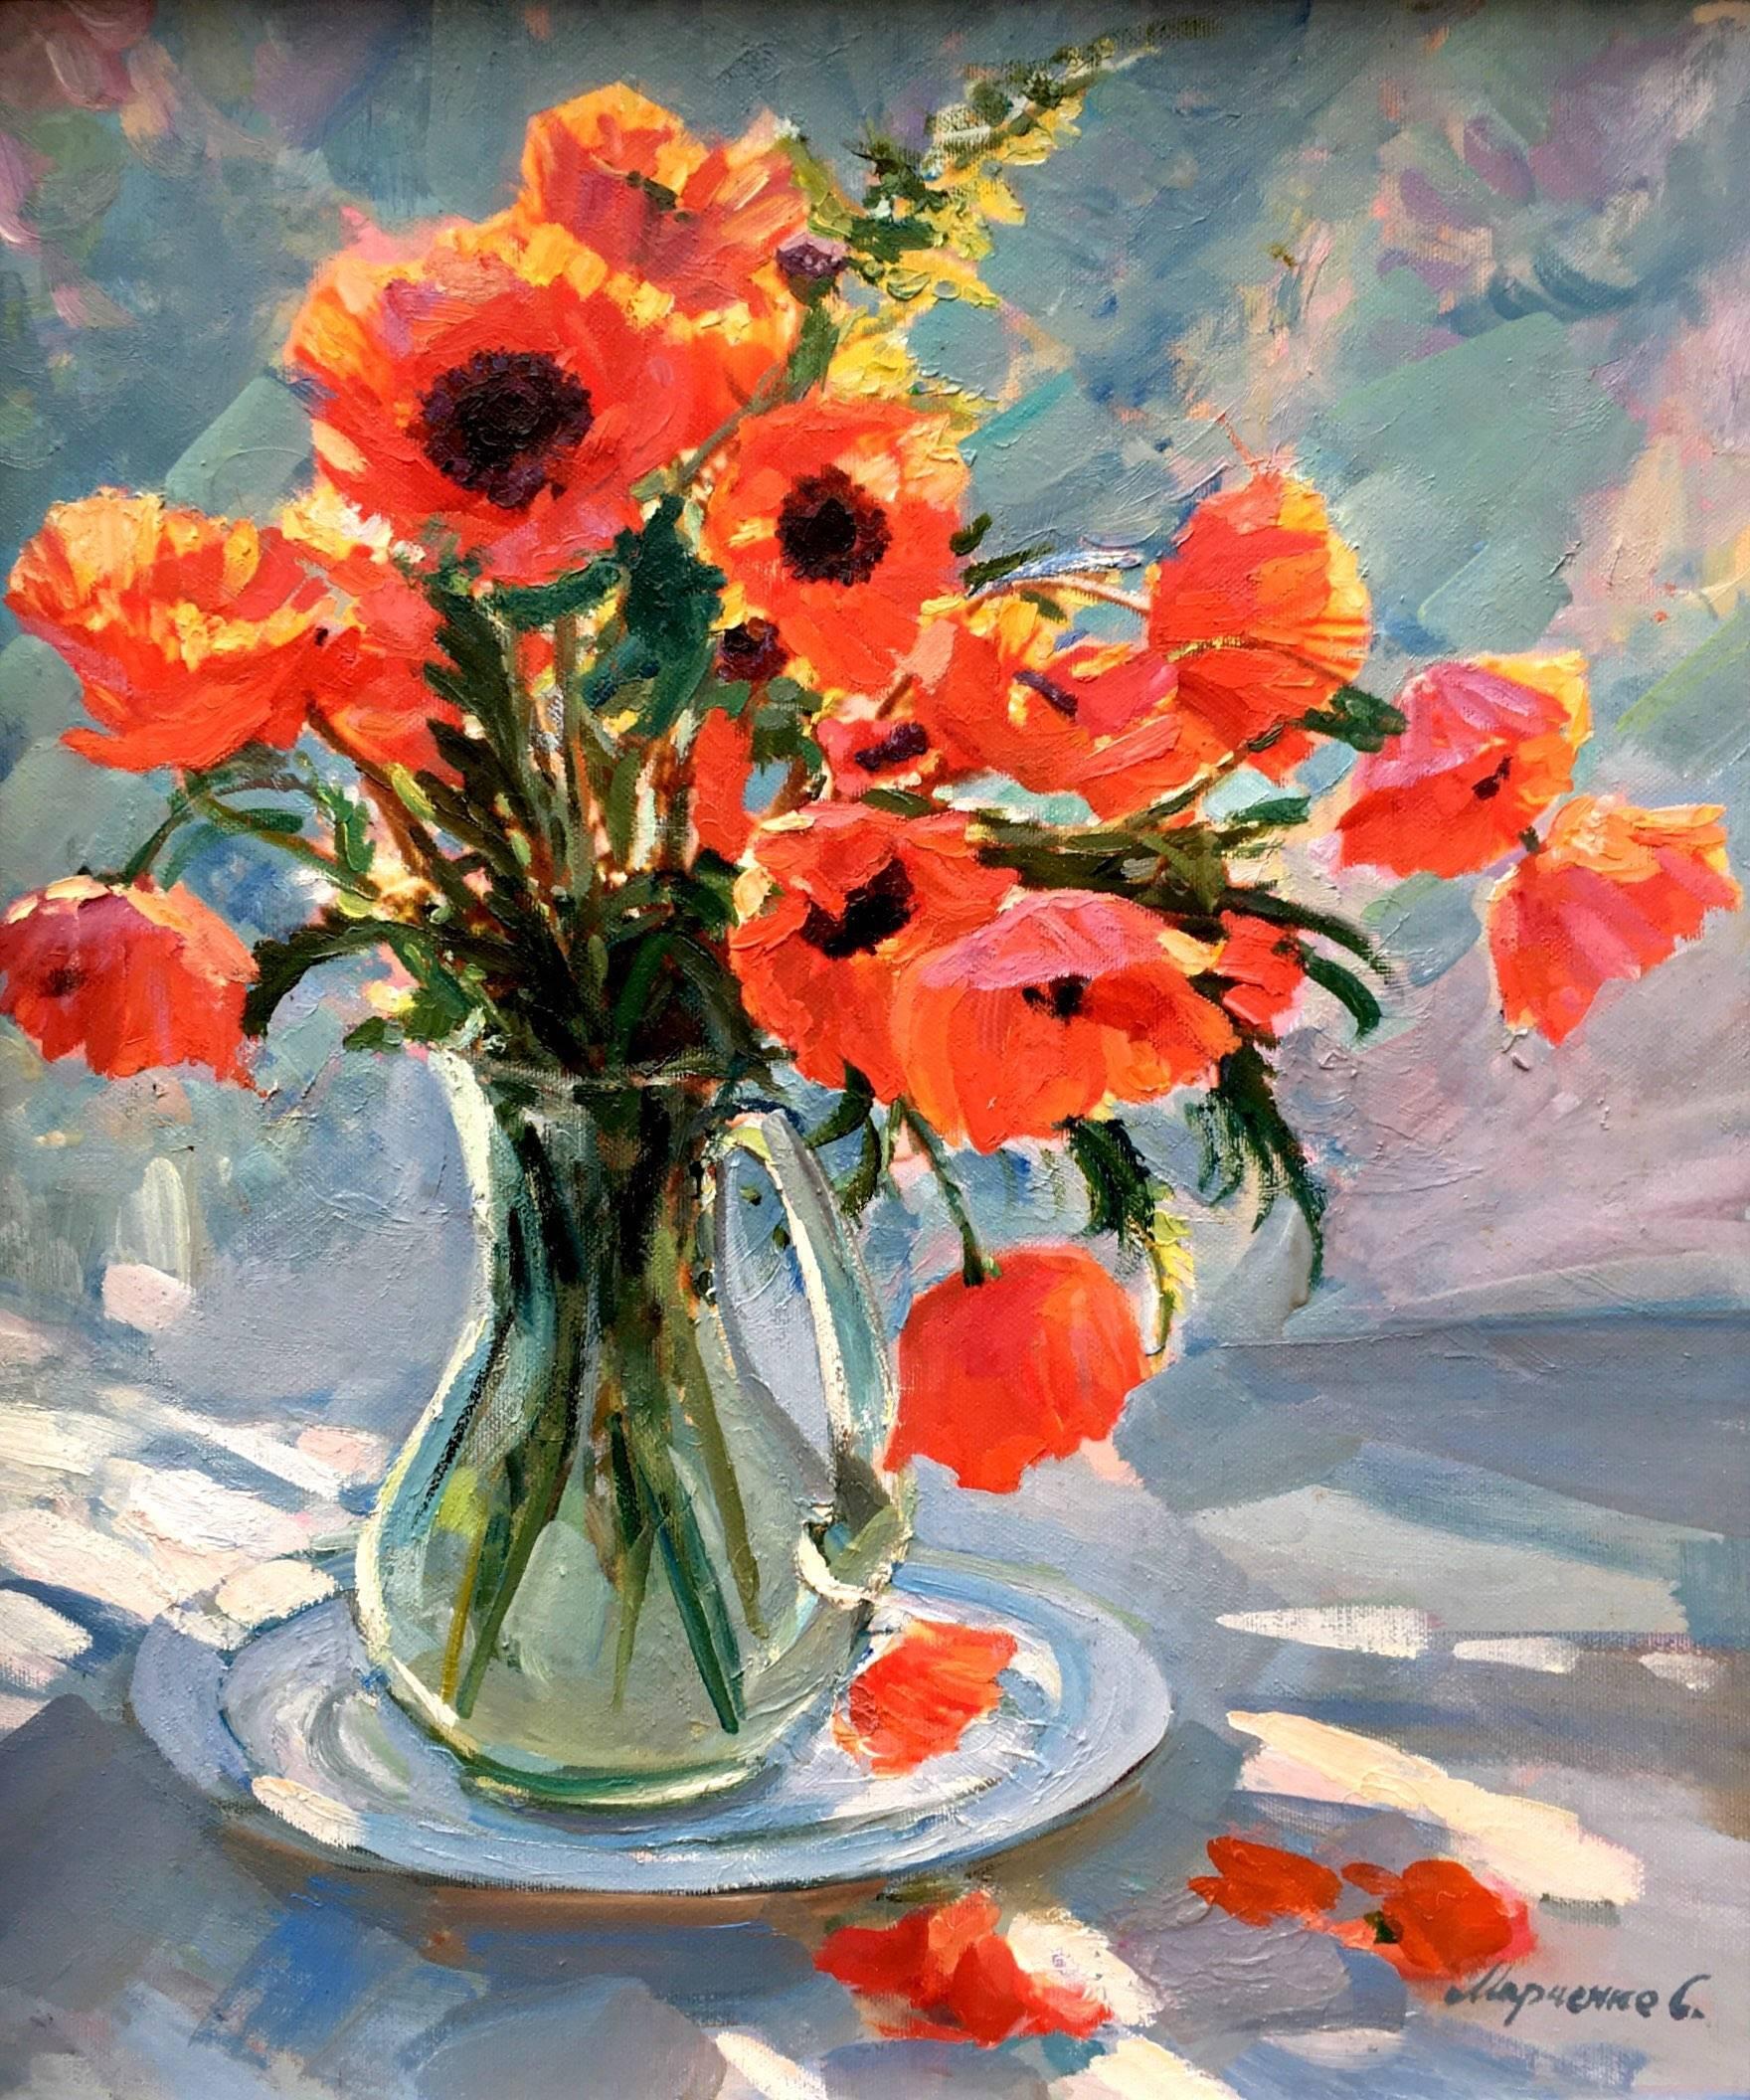 Sergey Marchenko Figurative Painting - The Poppies. Marchenko Impresionist vase with flowers. Oil con canvas still-life